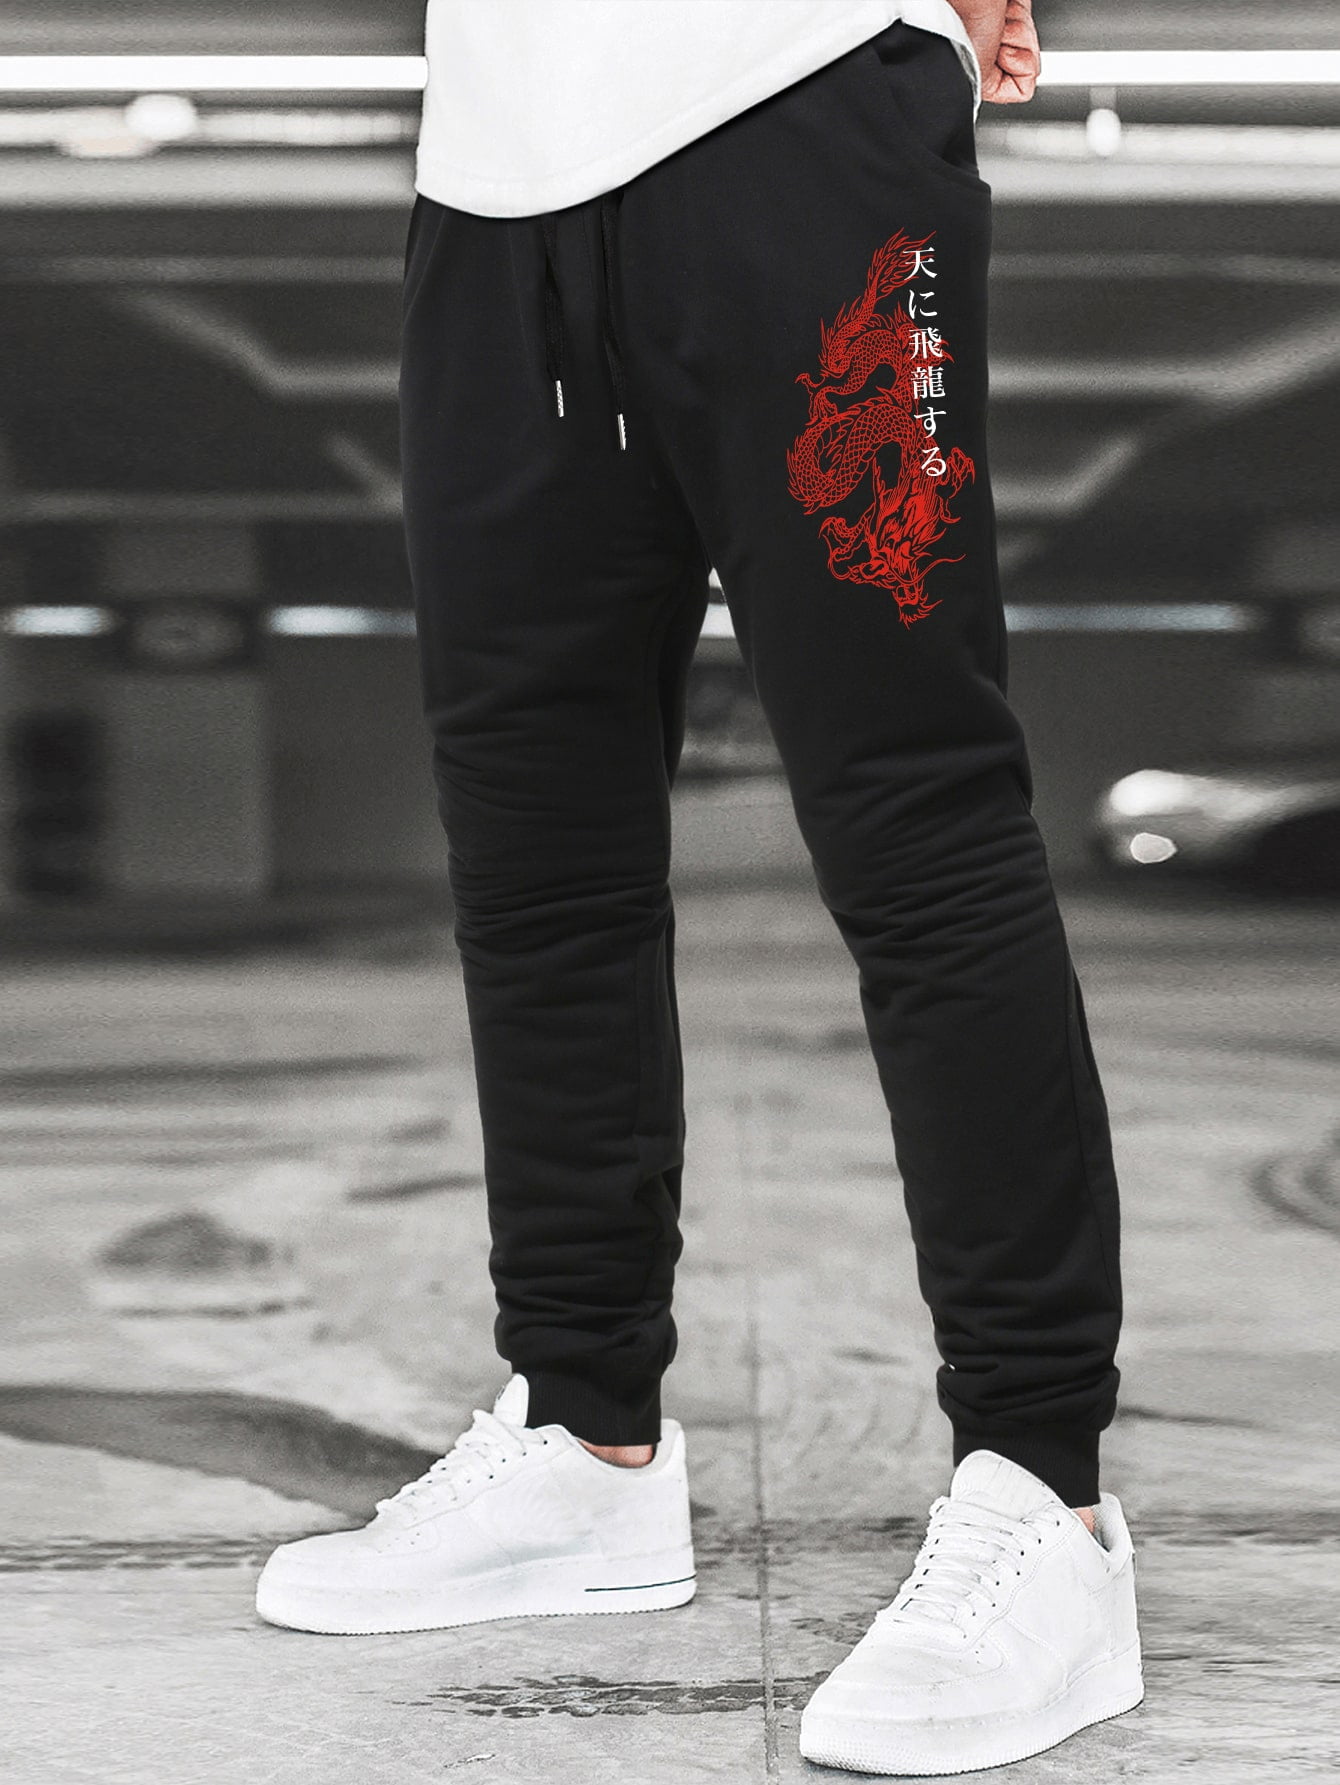 Mens Chinese Retro Dragon Embroidery Pants Casual Long Trousers Sweatpants Chic 